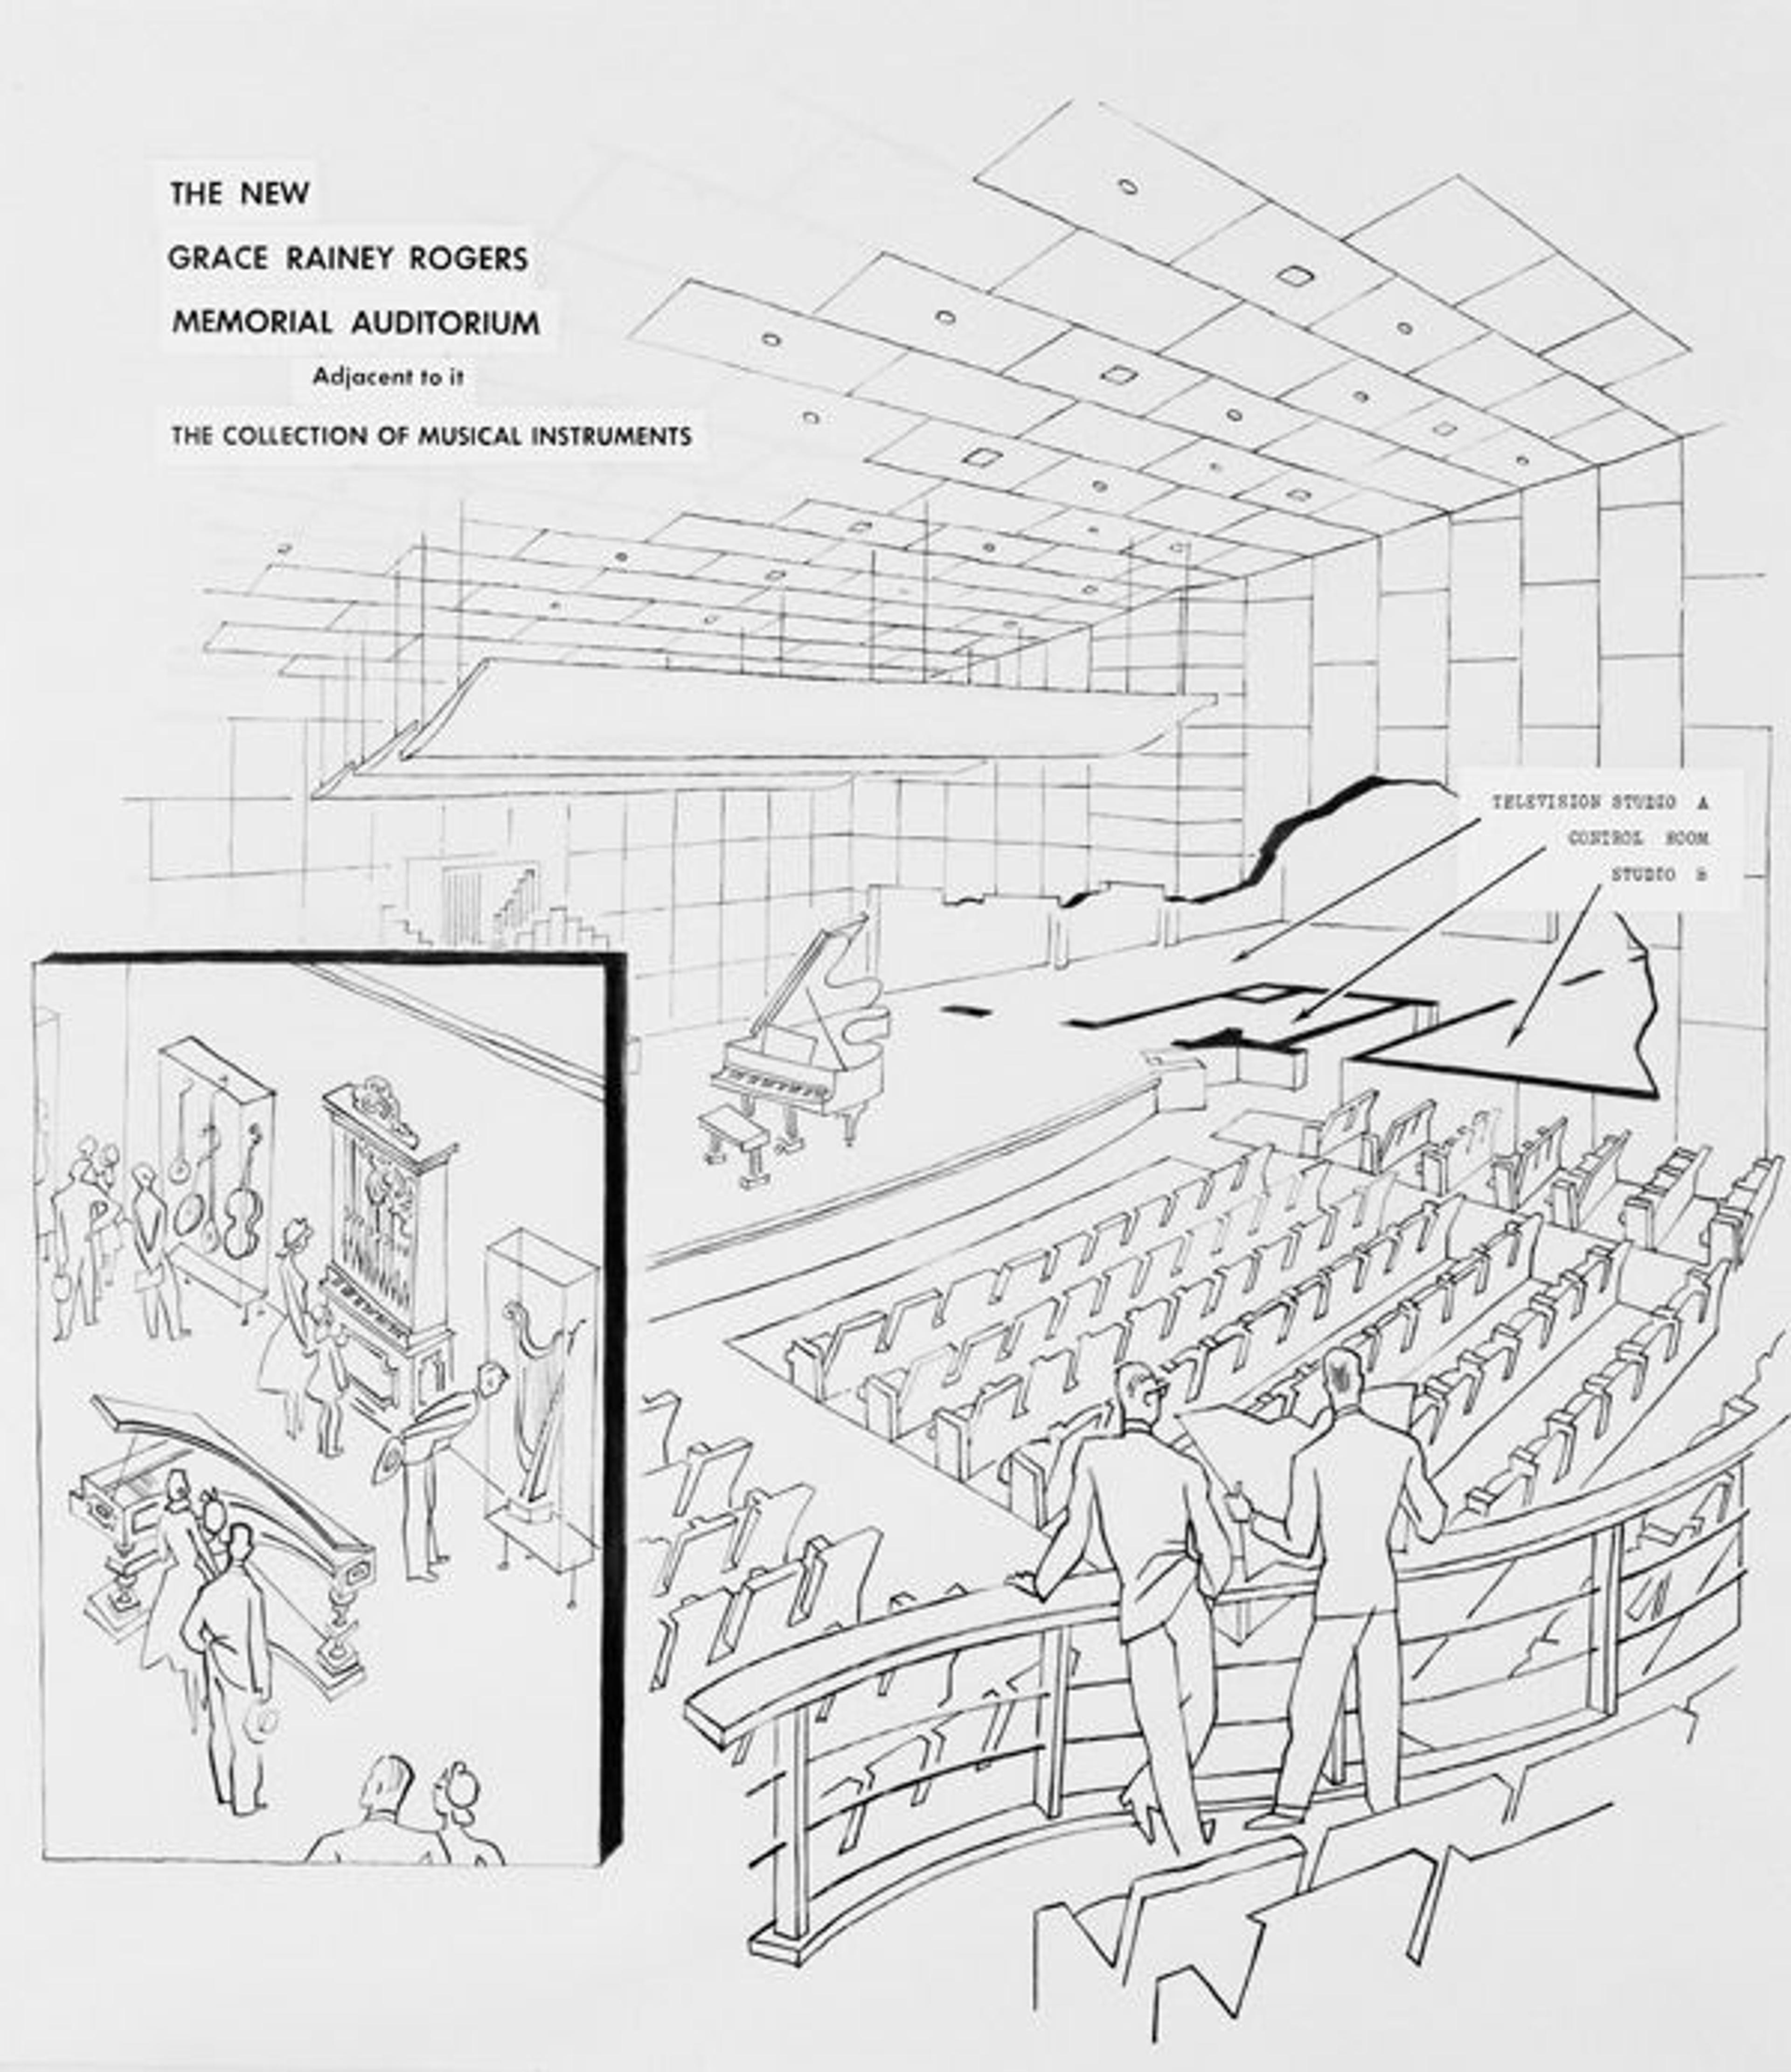 The Metropolitan Museum of Art, Grace Rainey Rogers Auditorium; Drawing or plan for The New Grace Rainey Rogers Mermorial Auditorium